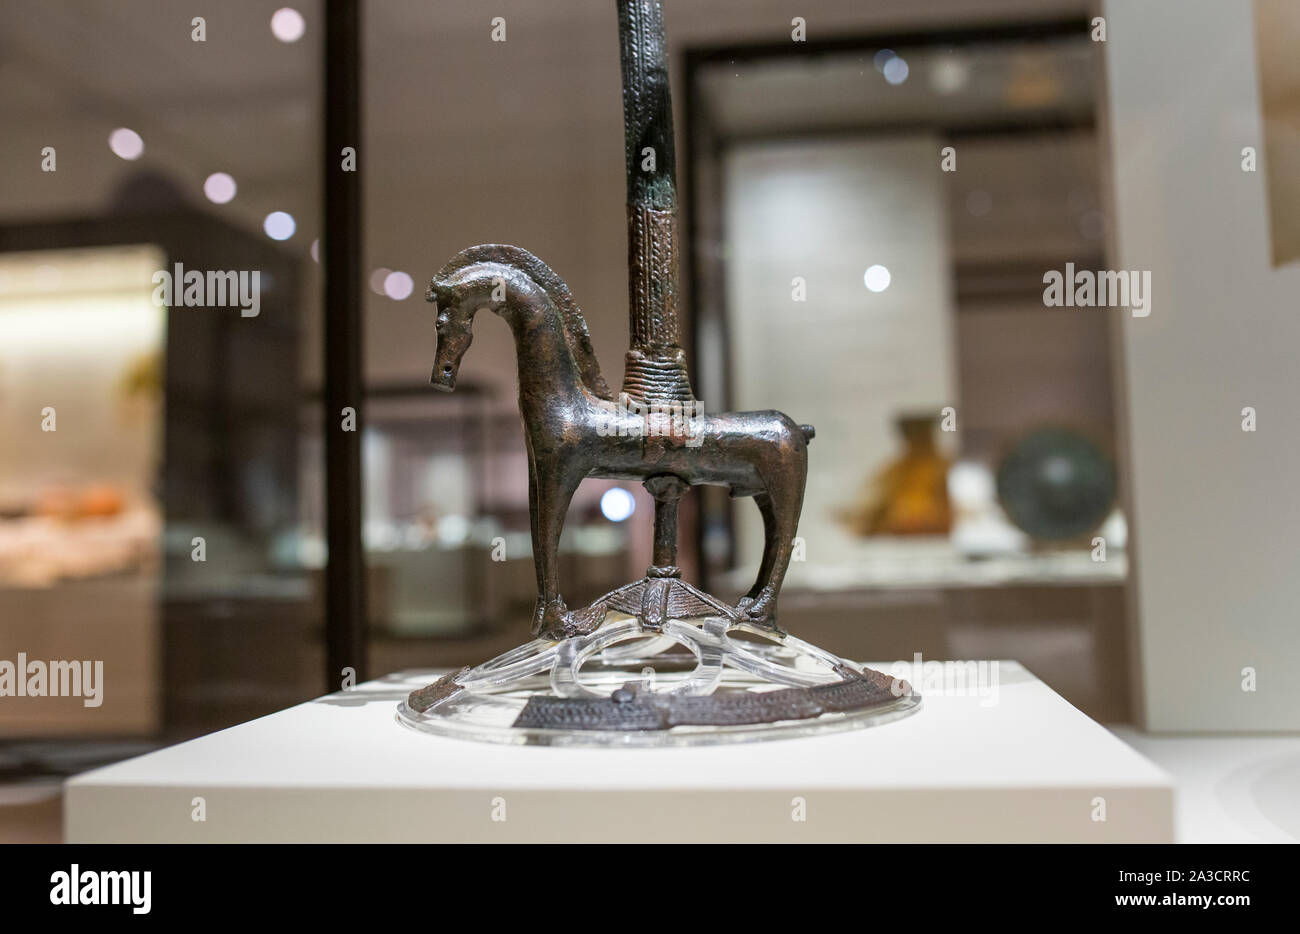 Madrid, Spain - November 10, 2017: Calaicete Censer or thymiaterion stand. 6th Century BC bronze piece from Teruel, Spain. National Archaeological Mus Stock Photo